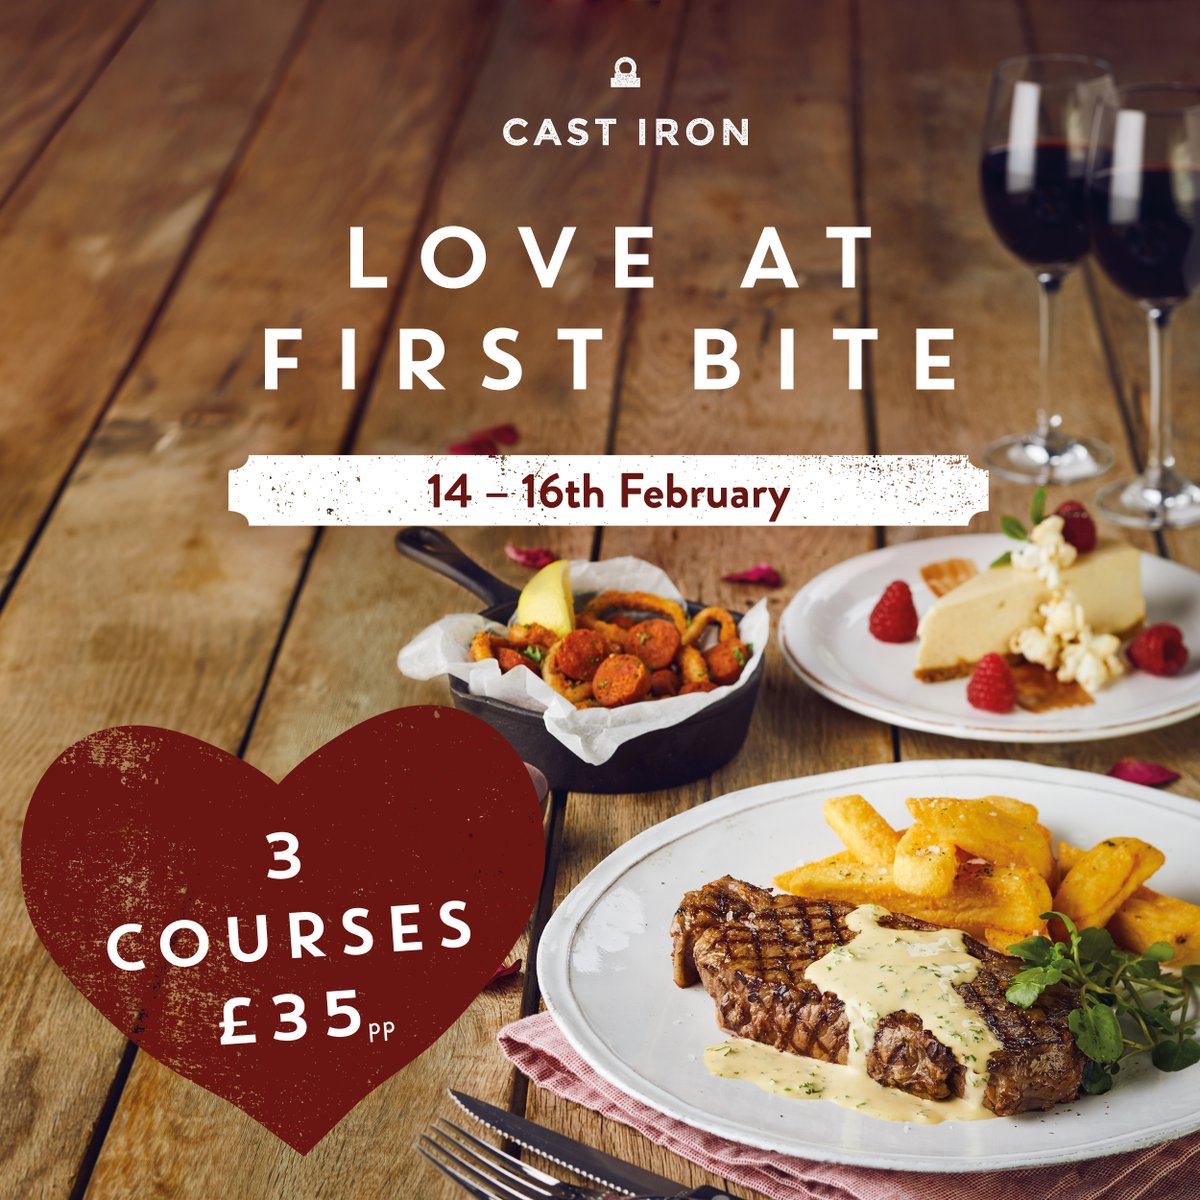 Have you booked your Valentine's meal yet? We have a special 3-course menu offering from 14th - 16th February for only £35. Is there a better way to say I love you? #Valentine #DiningOut #Love #Romance